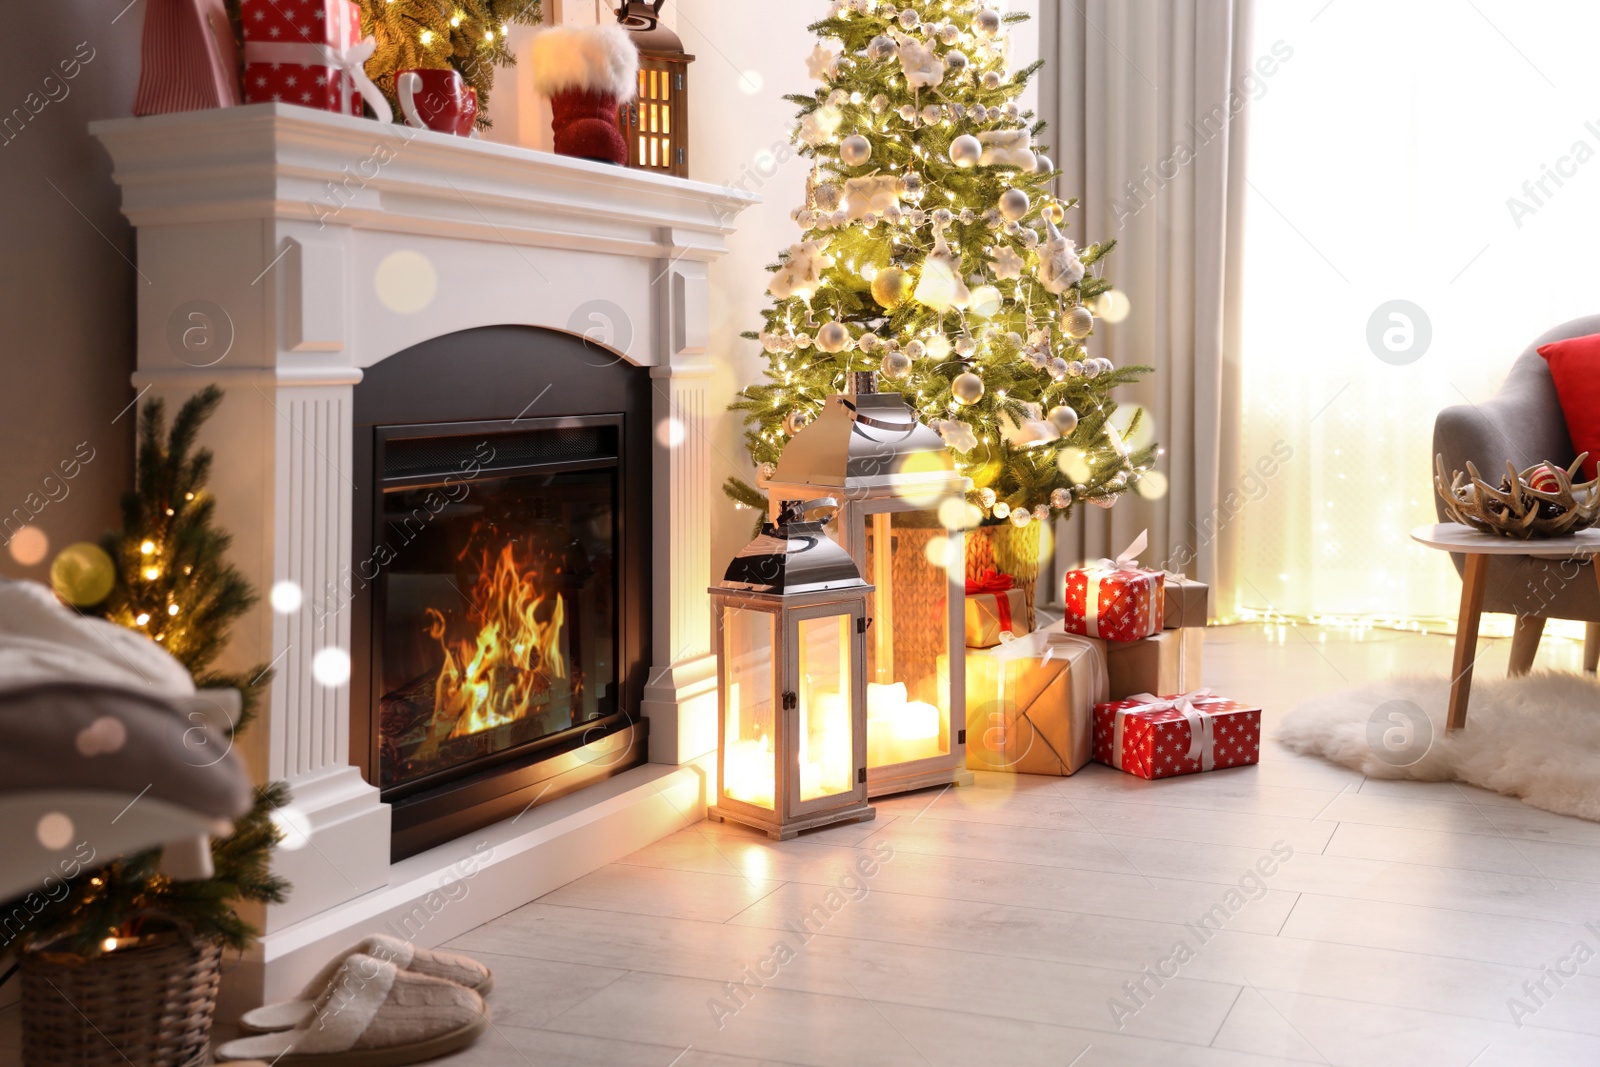 Image of Stylish room interior with fireplace and beautiful Christmas decor